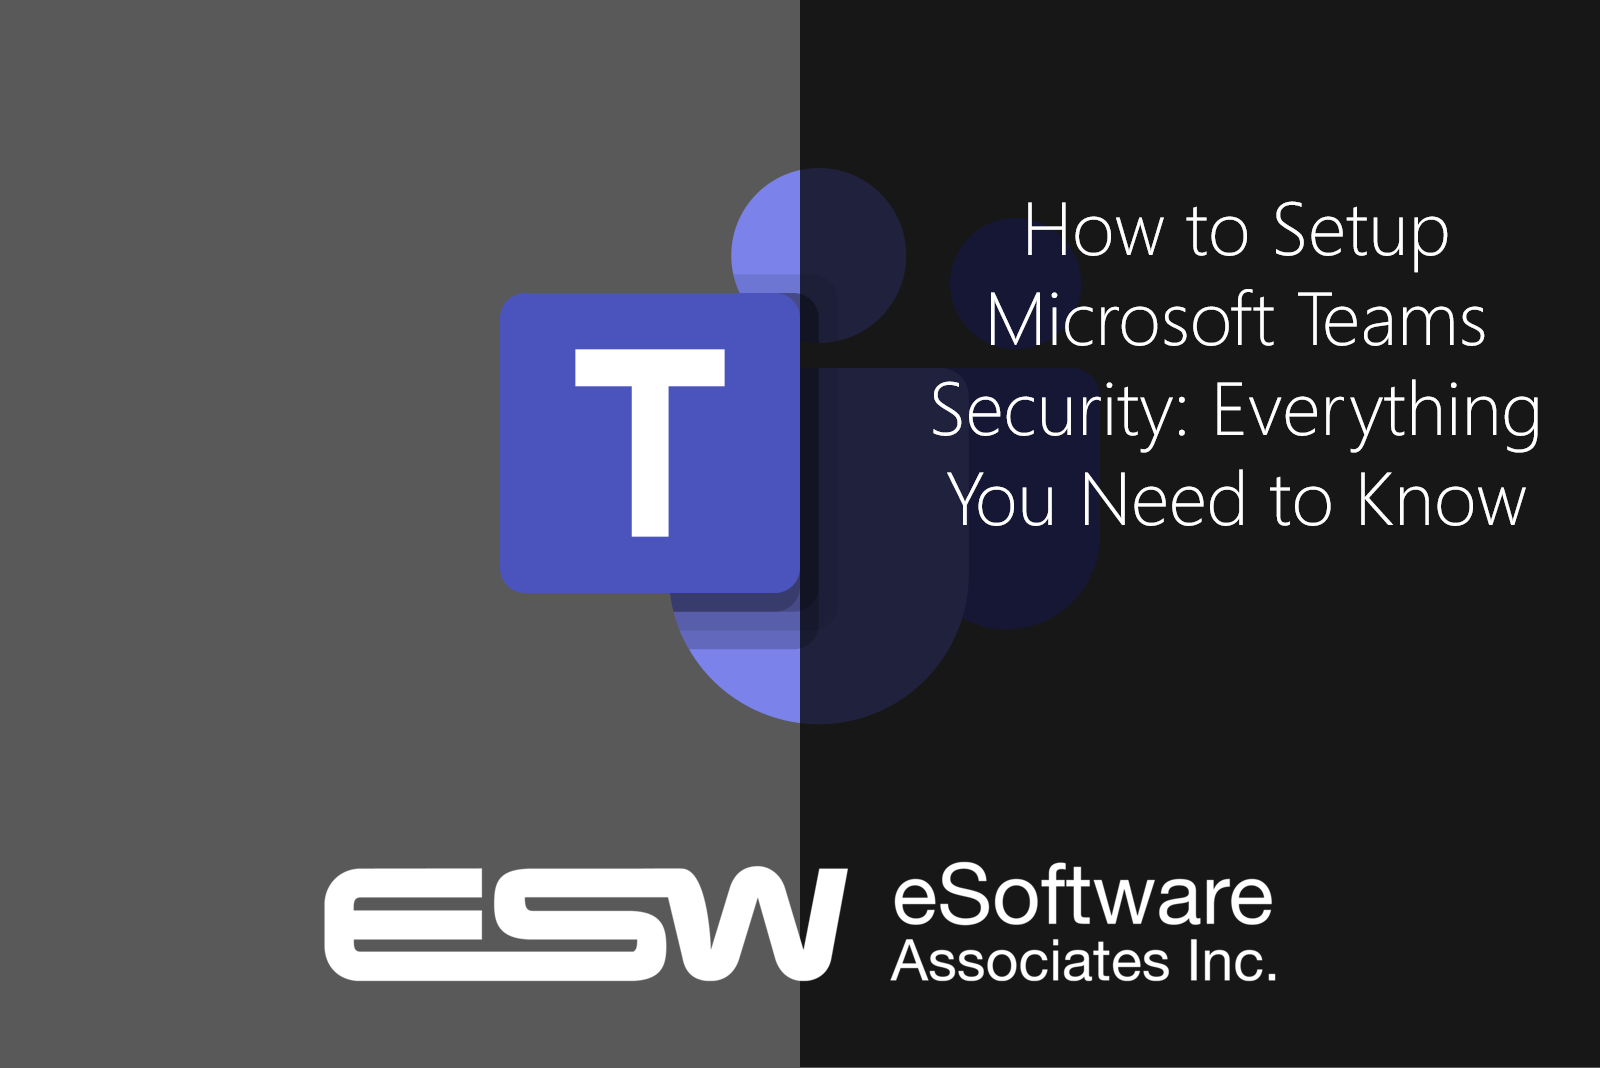 Everything You Need to Know to Setup Microsoft Teams Security